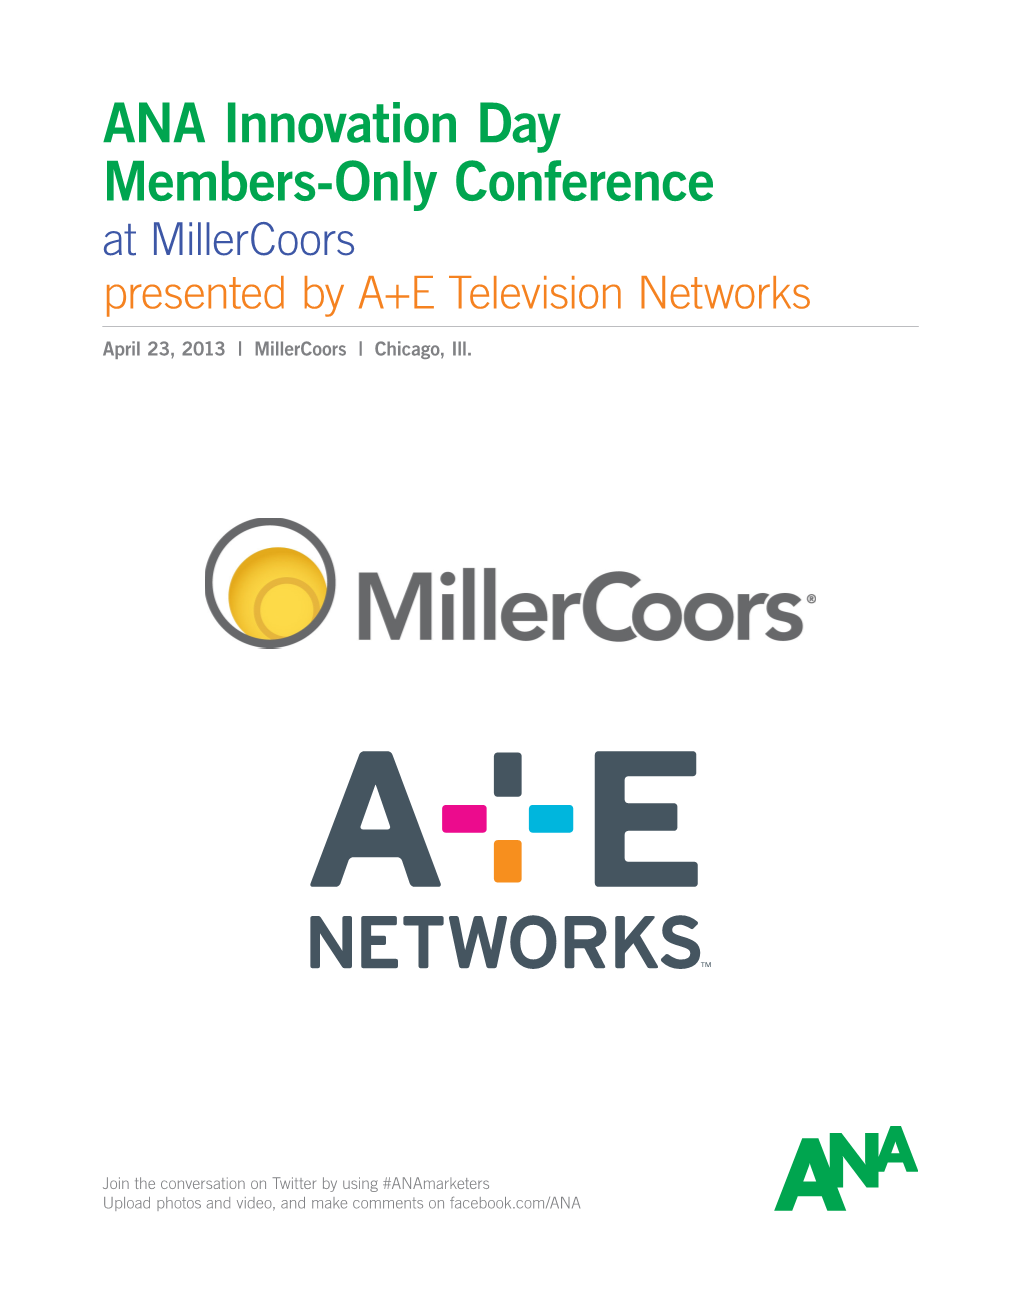 ANA Innovation Day Members-Only Conference at Millercoors Presented by A+E Television Networks